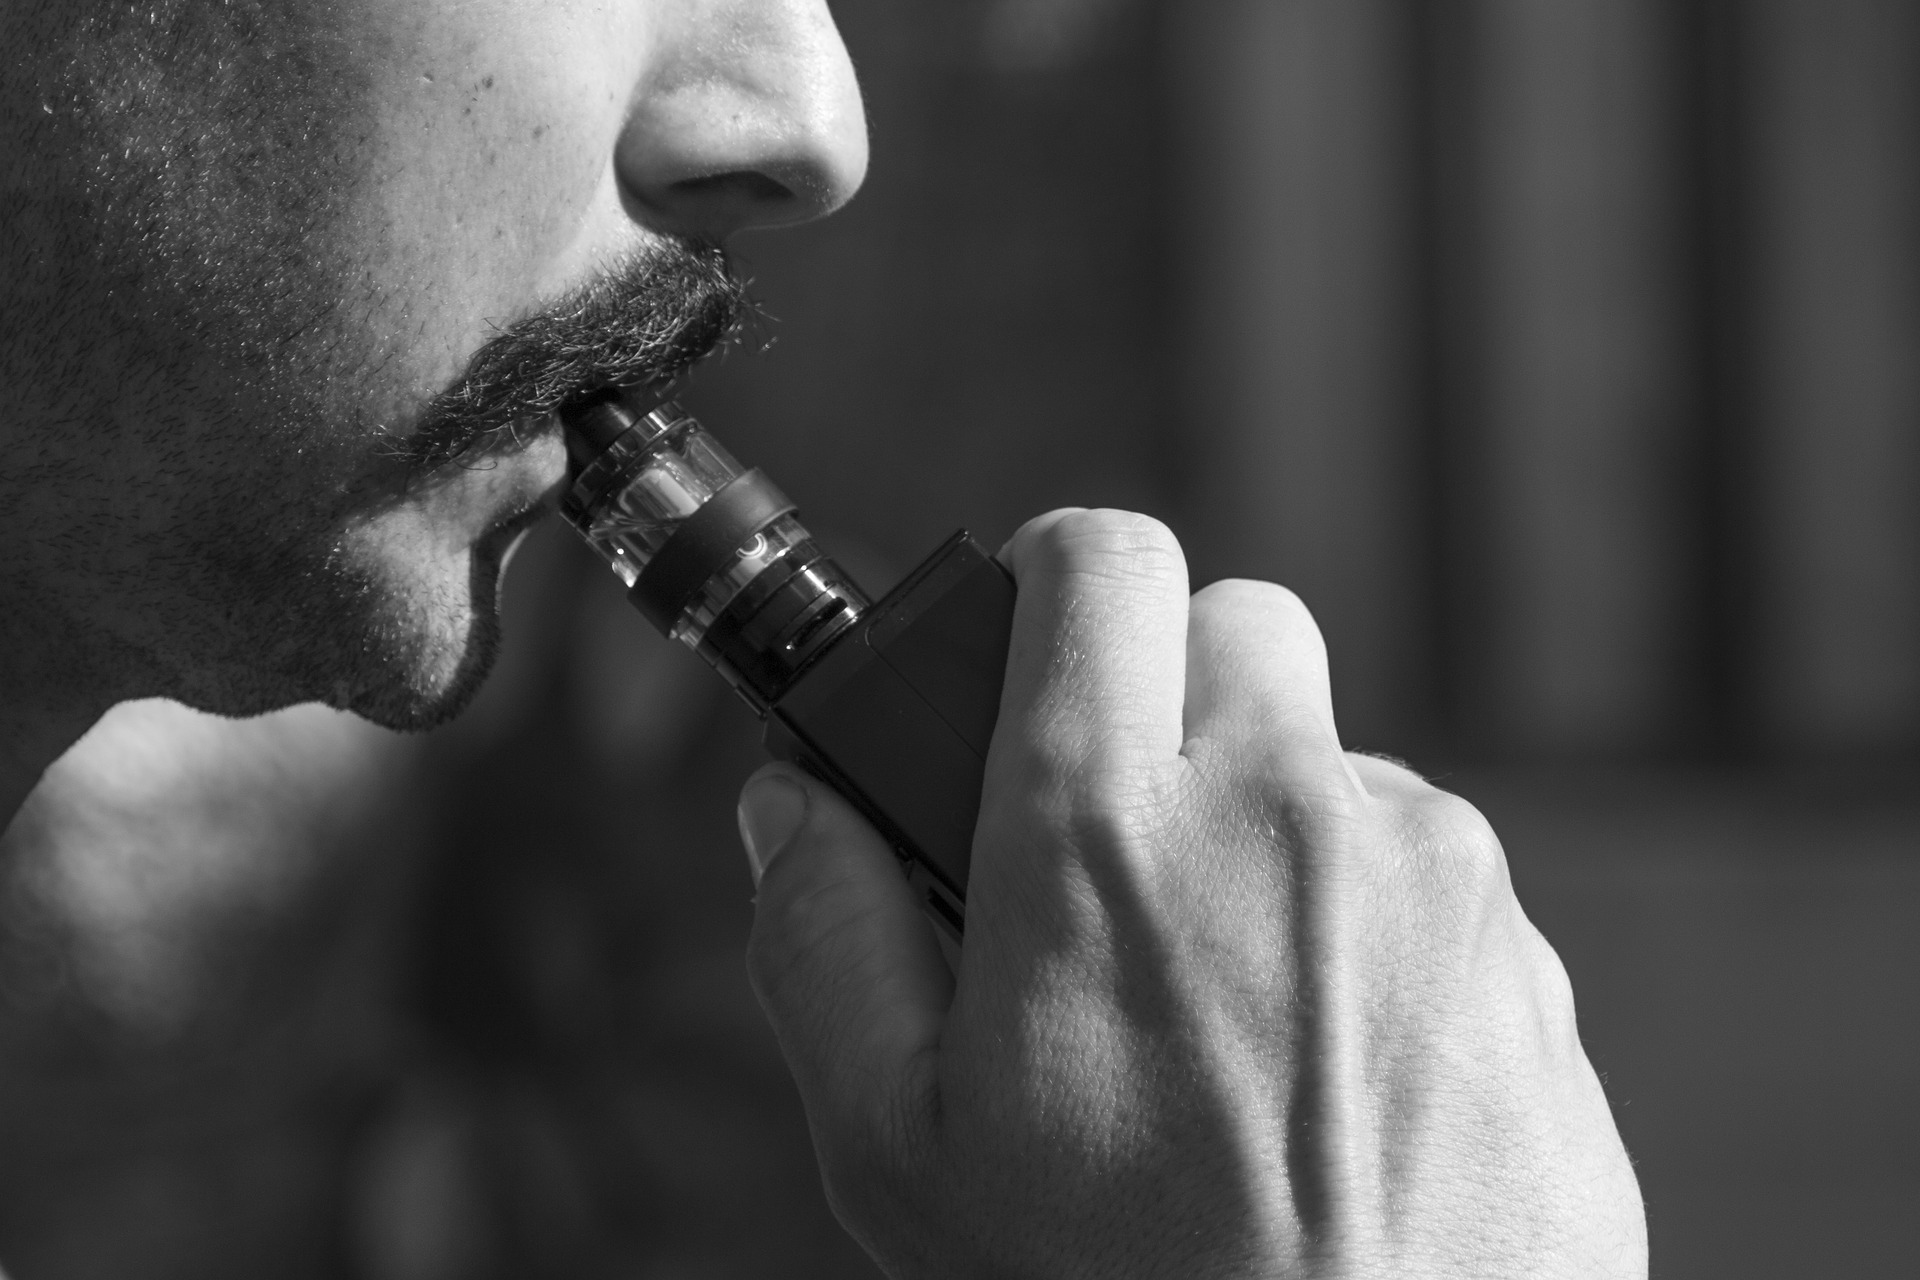 man vaping heat not burn cigarettes why vaping could be more dangerous than you think